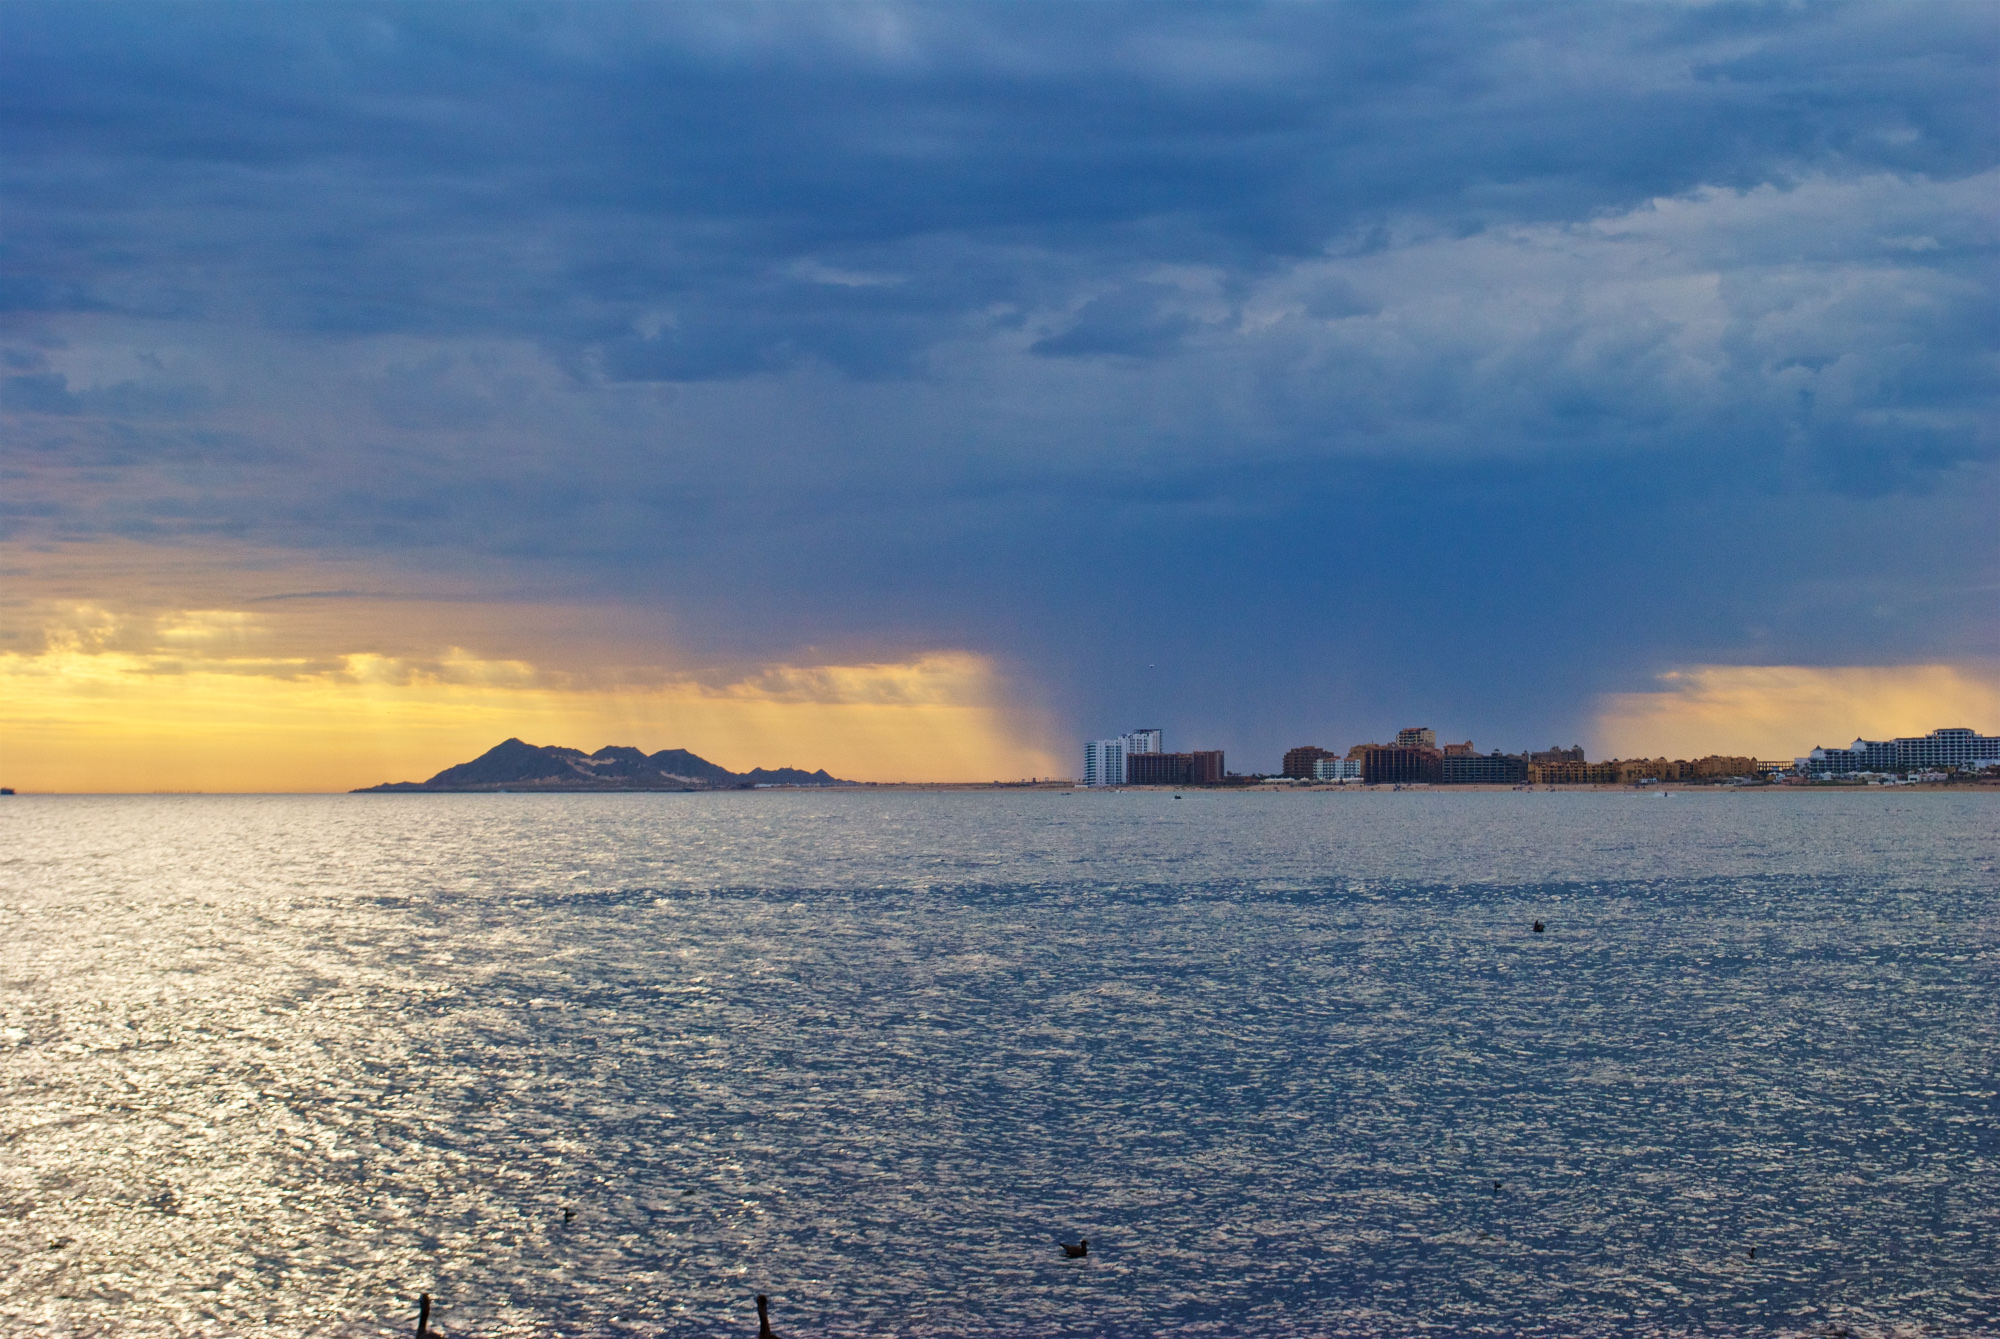 Summer monsoon over the Sea of Cortez